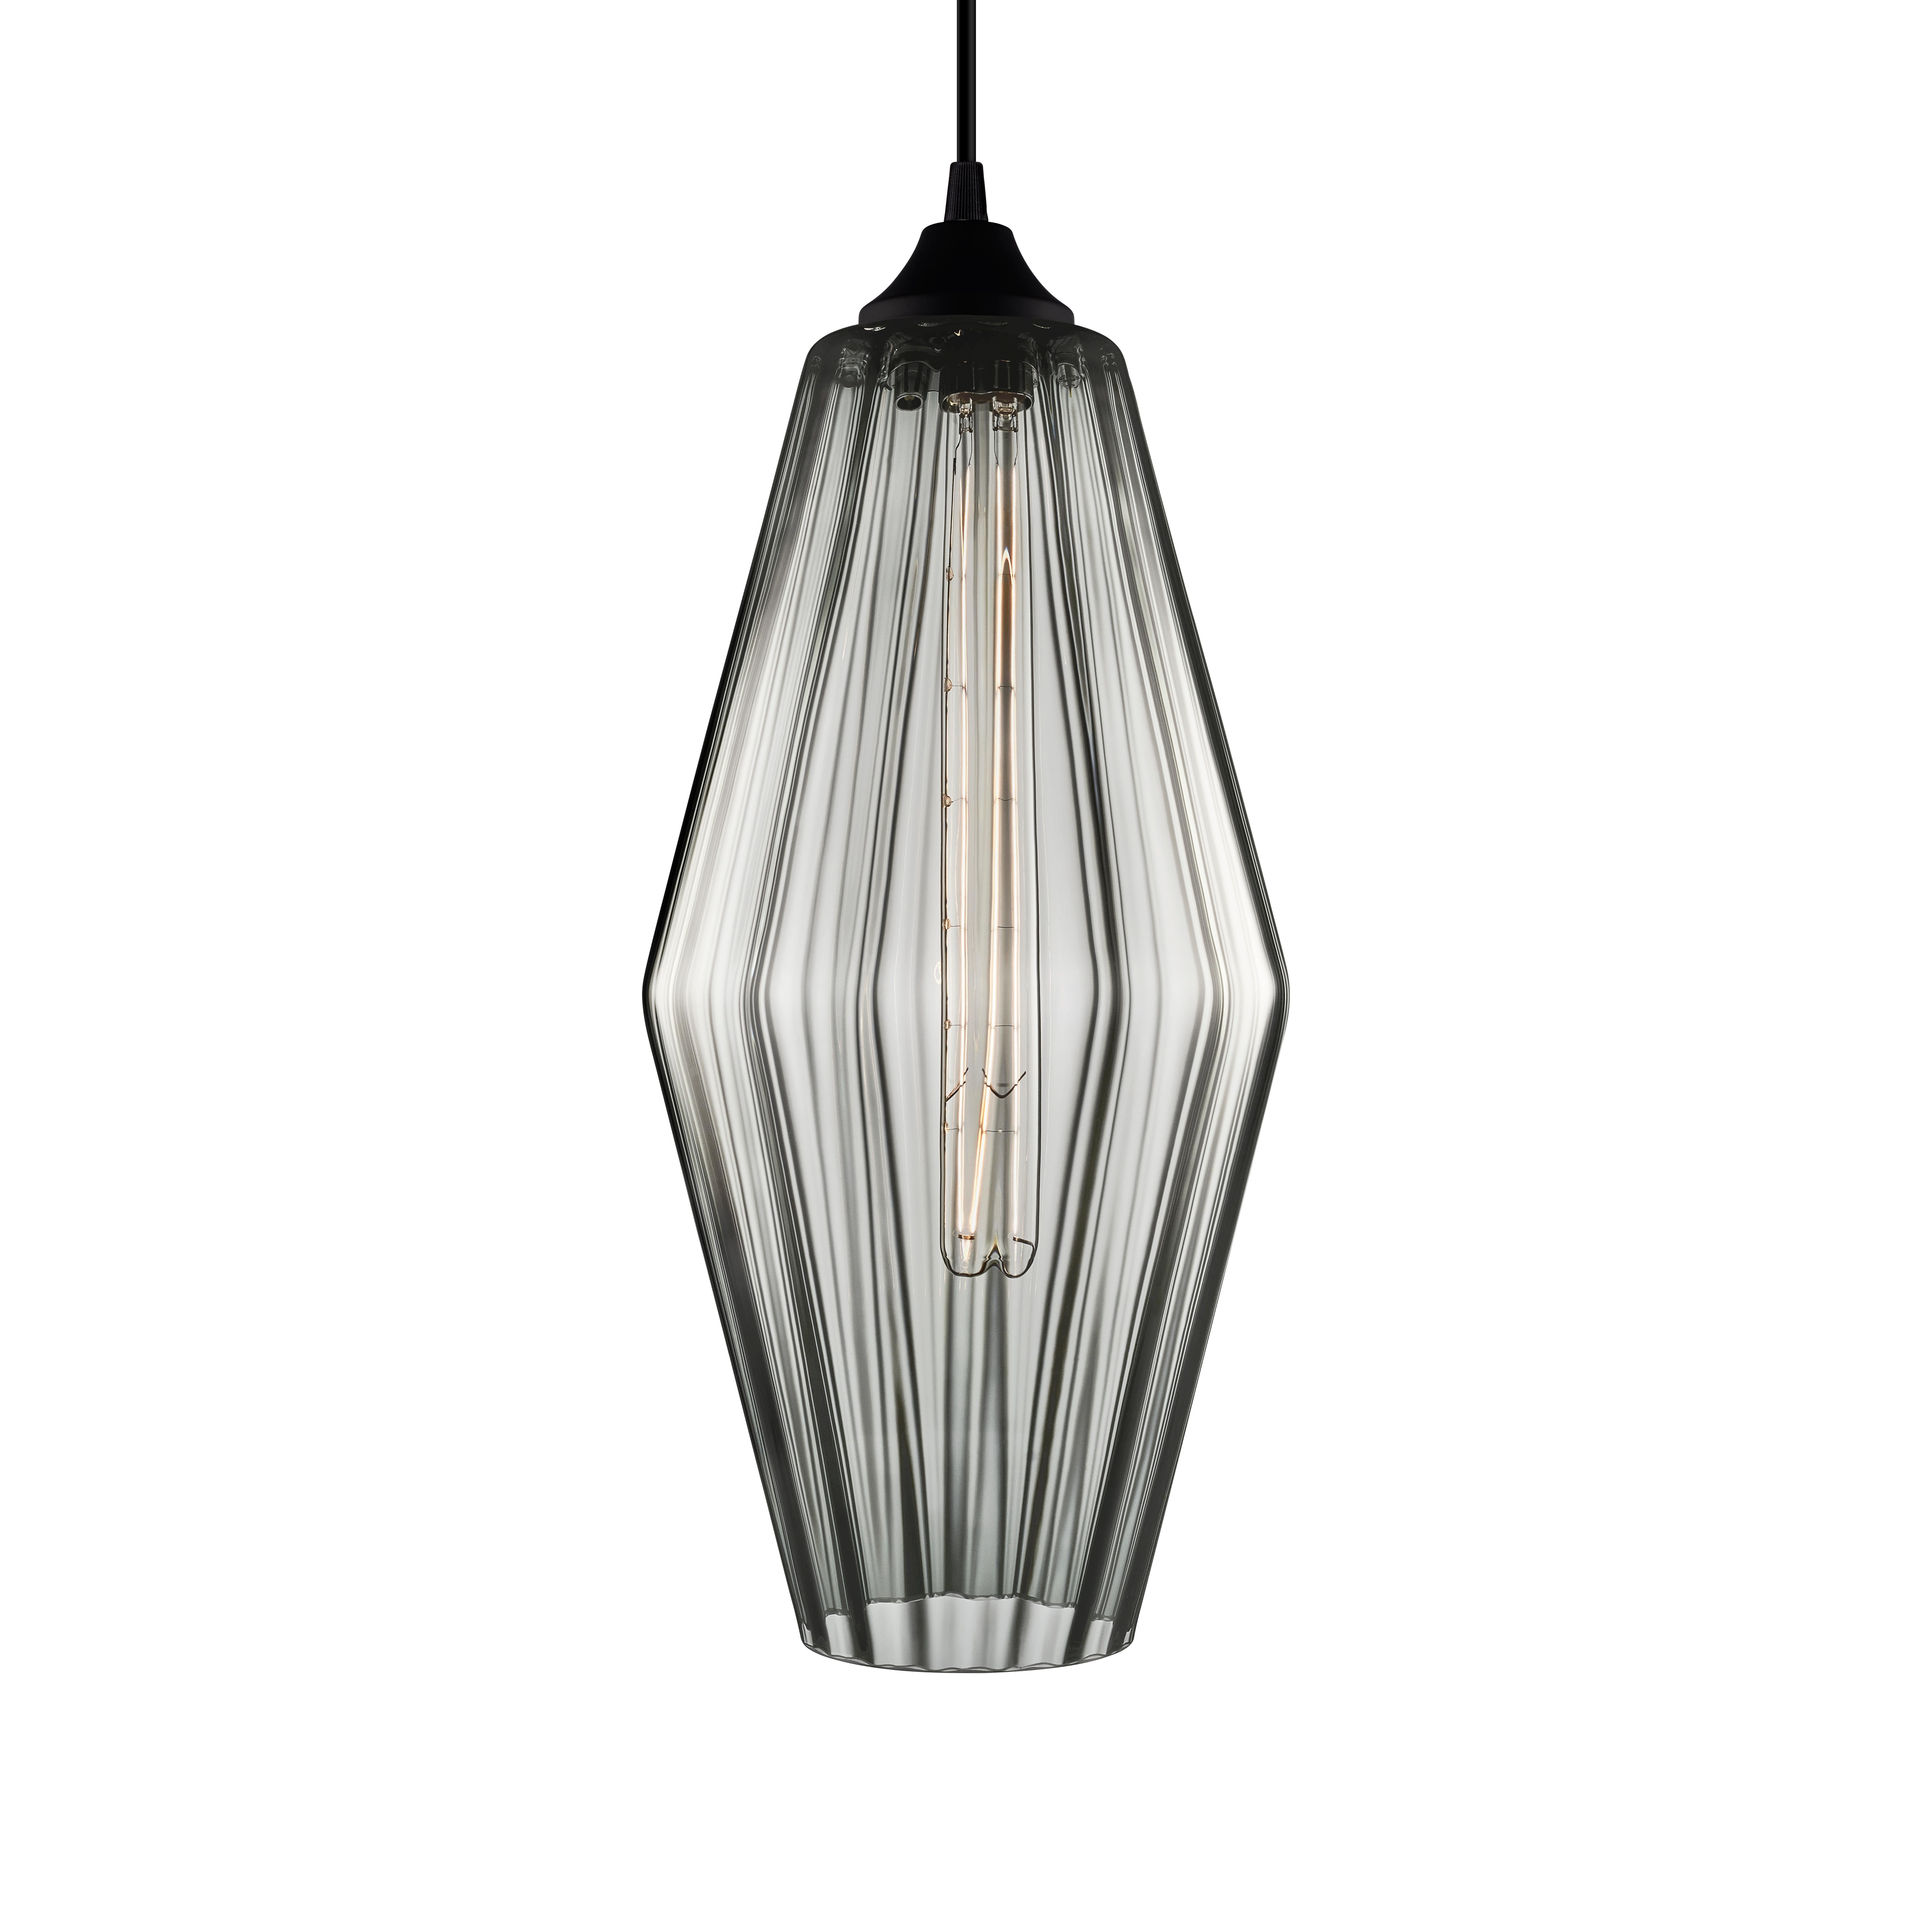 Marquise Grand Gray Optique Handblown Modern Glass Pendant Light, Made in the US